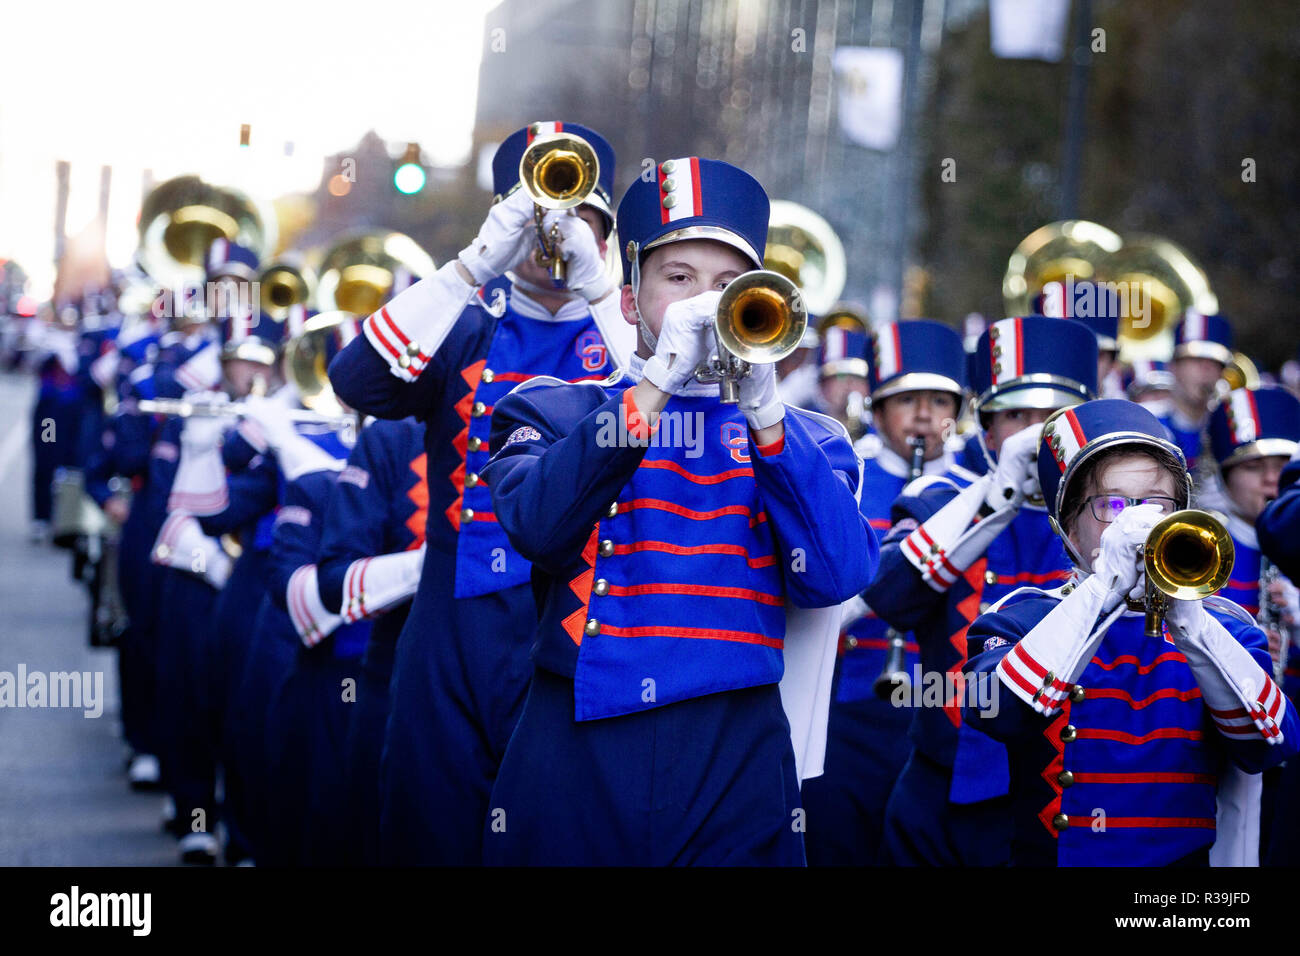 Philadelphia, Pennsylvania, USA. 22nd Nov, 2018. Marching bands from across the U.S. participate in the Thanksgiving Day Parade in Philadelphia. Credit: Michael Candelori/ZUMA Wire/Alamy Live News Stock Photo